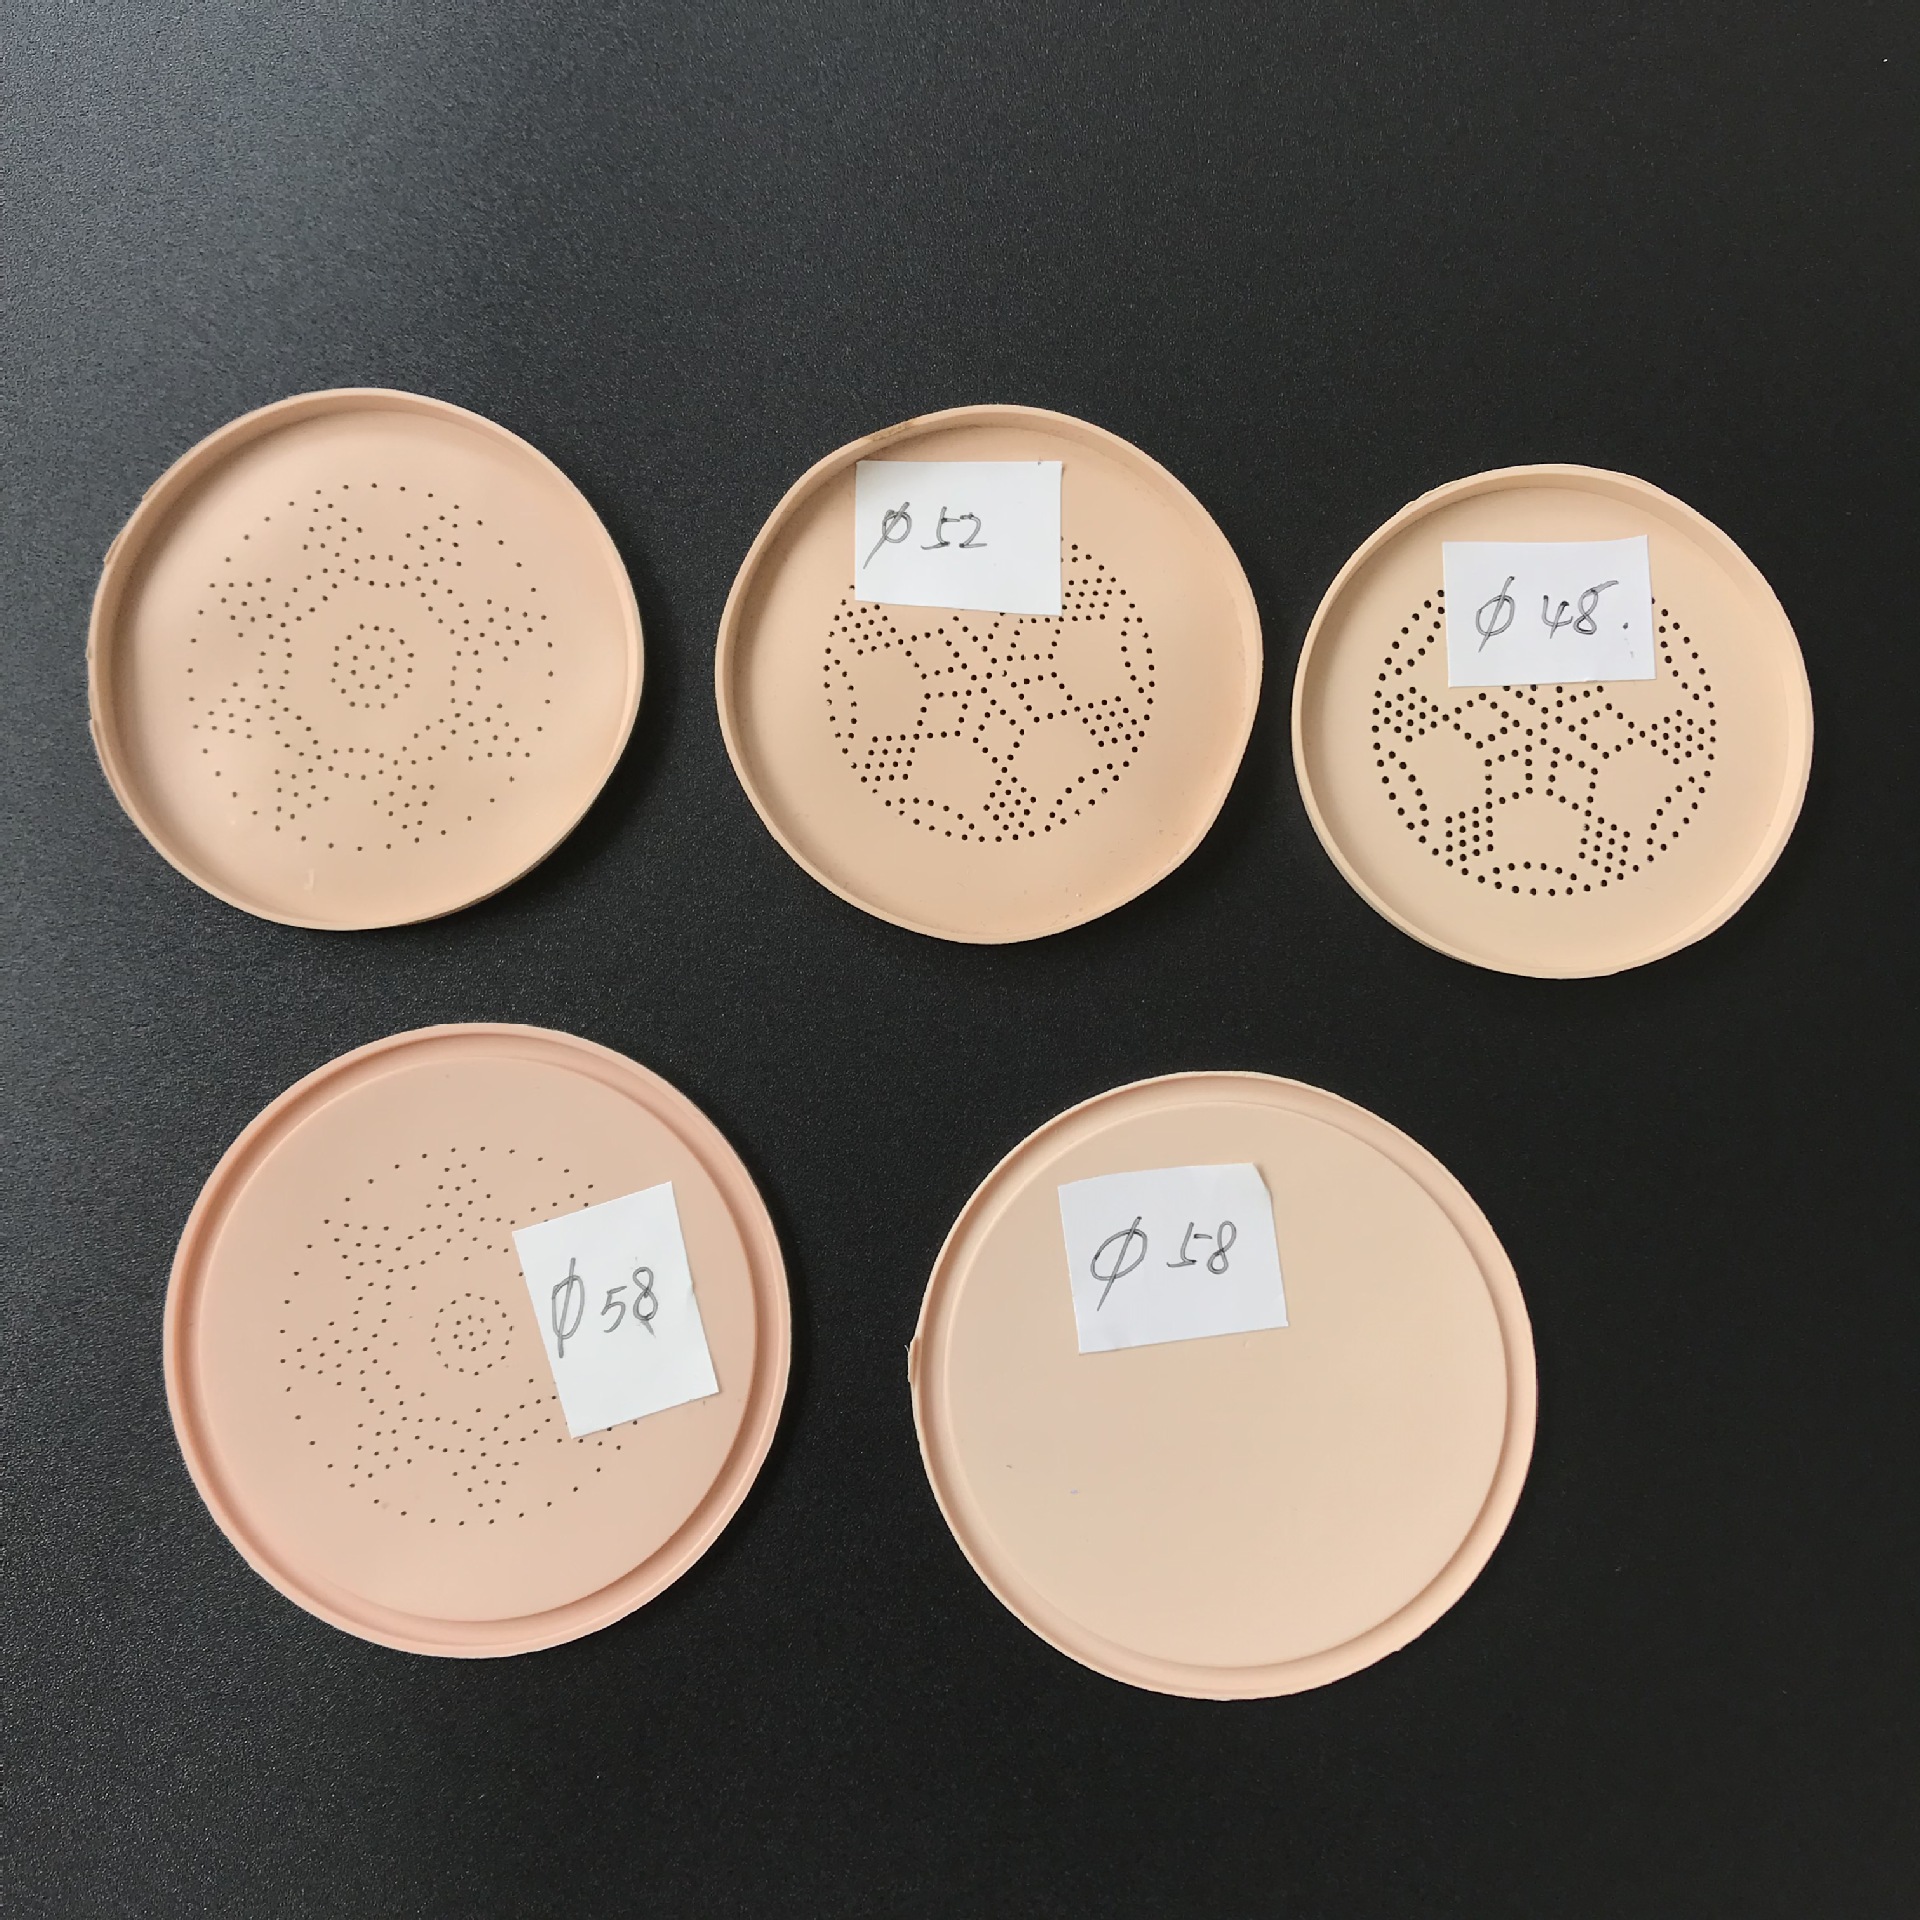 Silicone Products Factory Cosmetics Packaging Material Air Cushion BB Box Packaging Material Silica Gel Filter Screen Mushroom-Shaped Haircut Seal Silicone Gasket